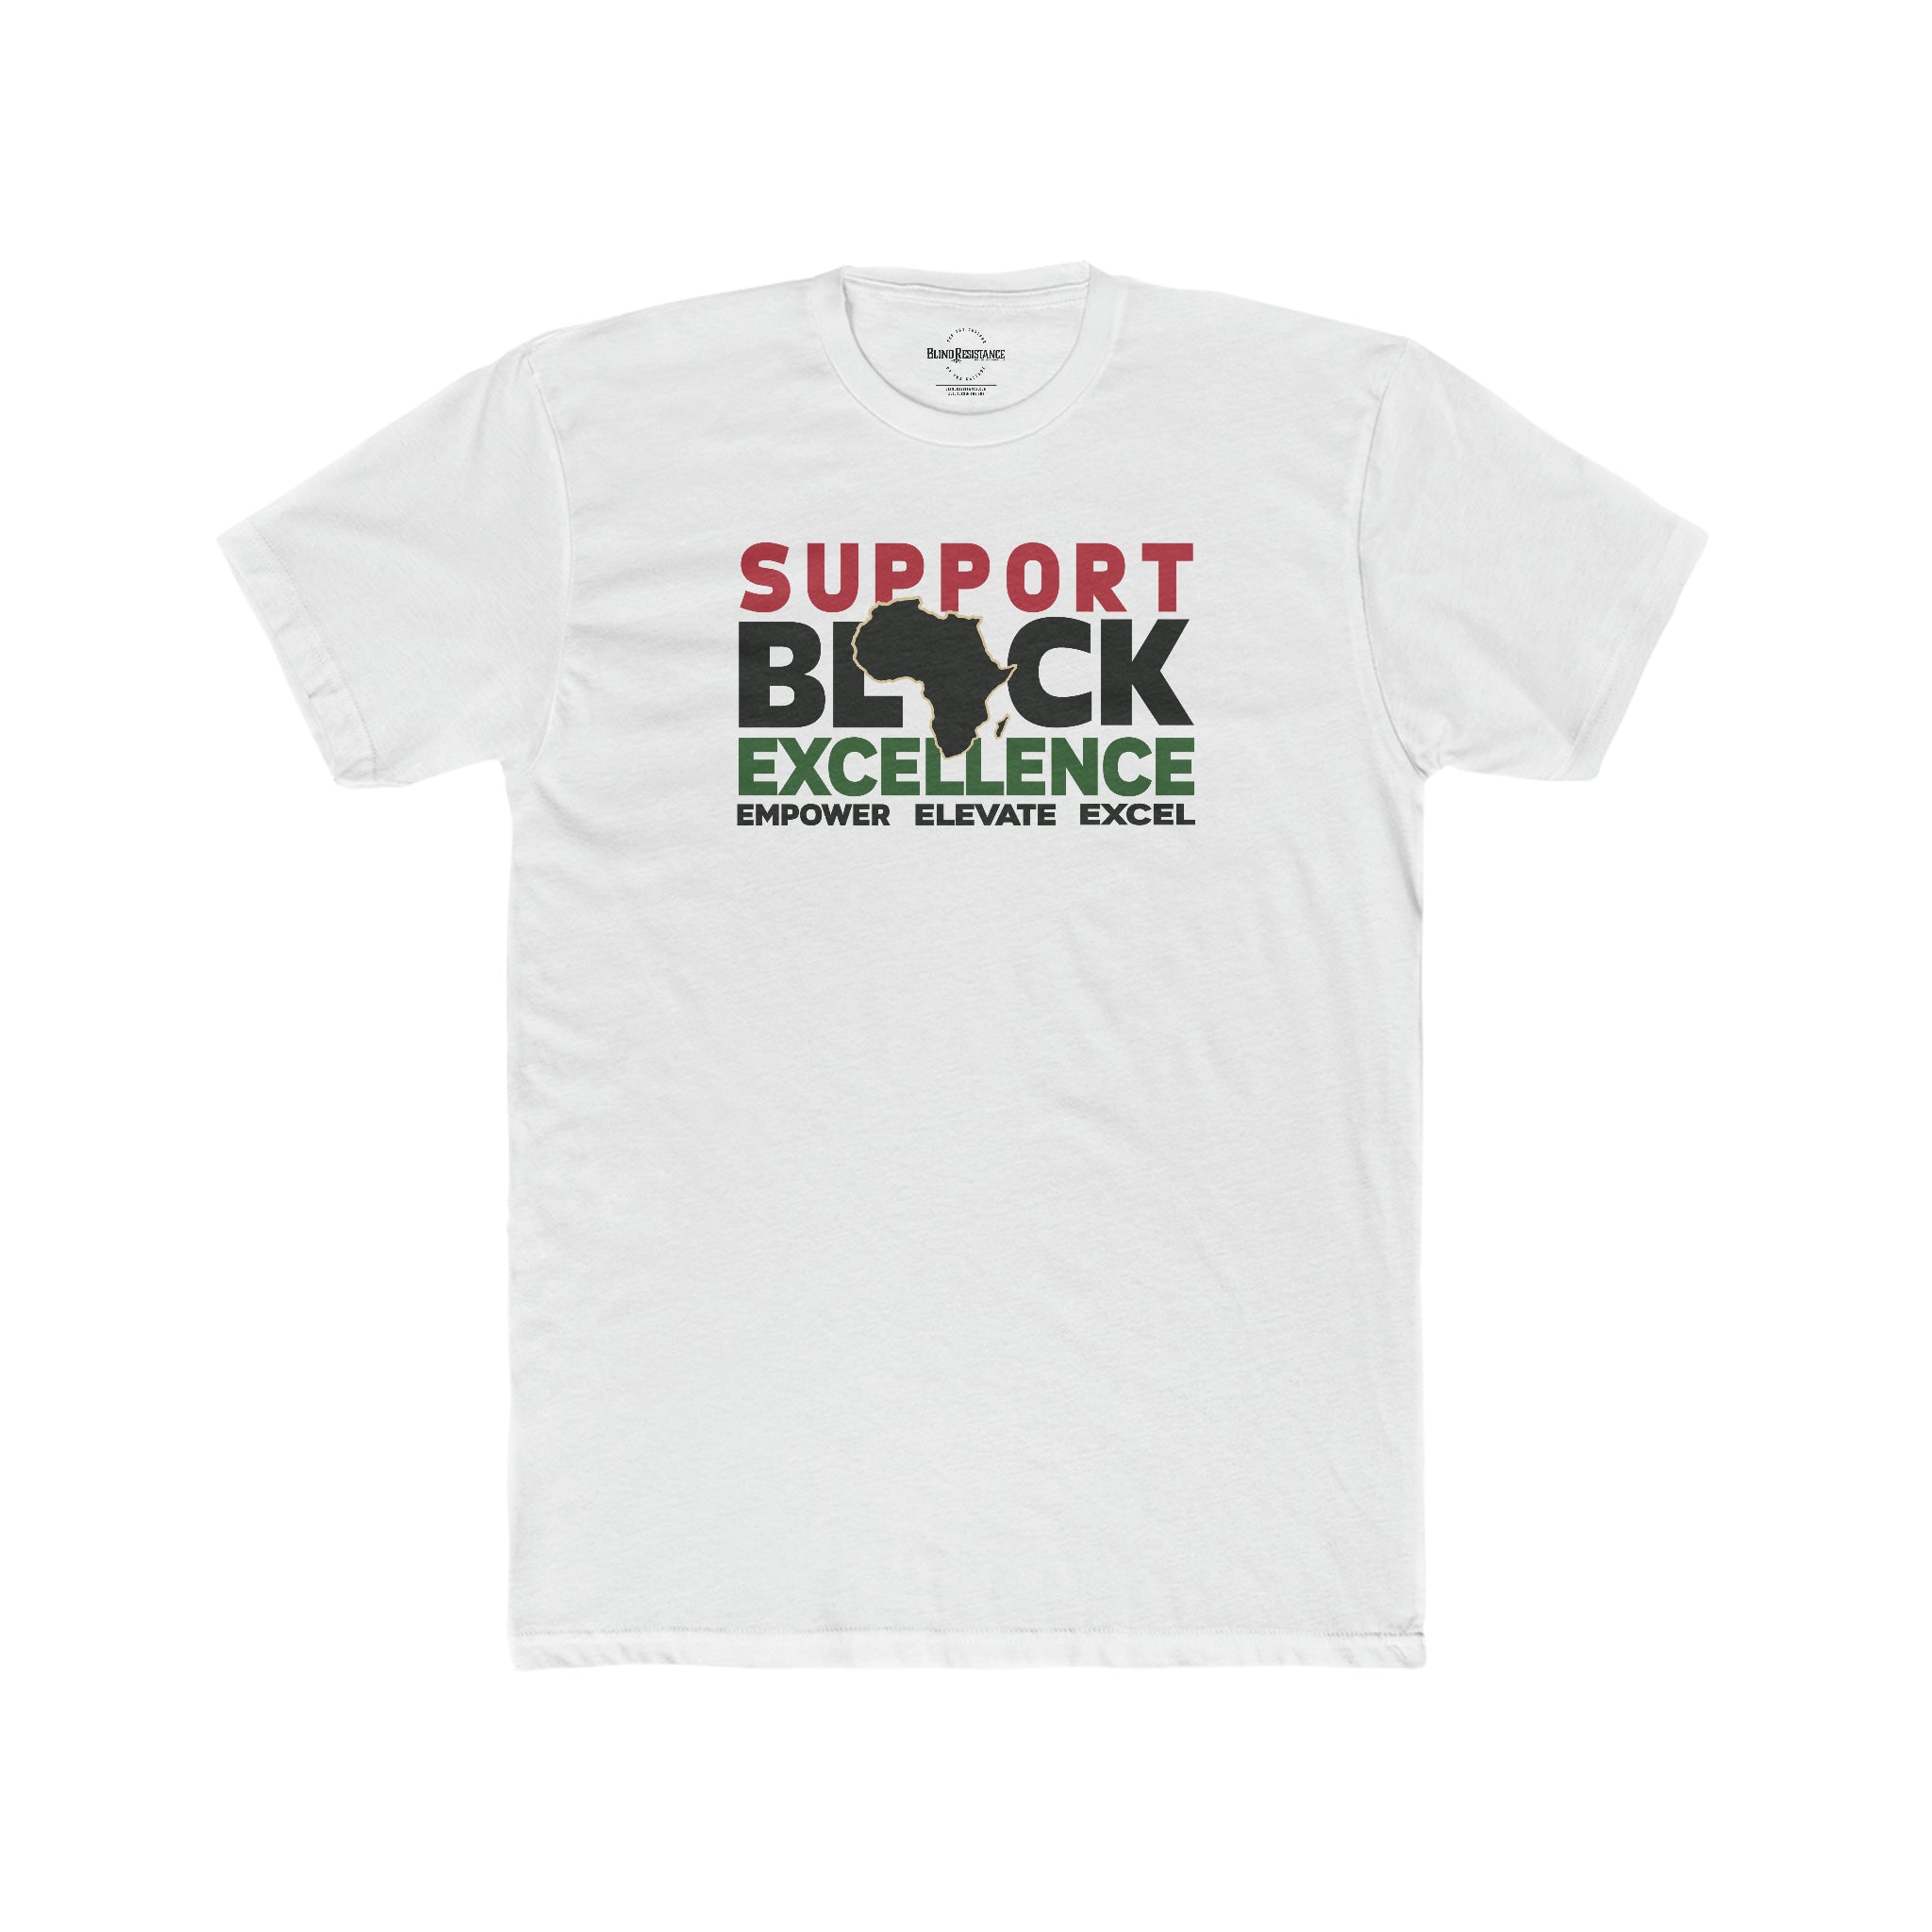 Support Black Excellence Premium Crew in White